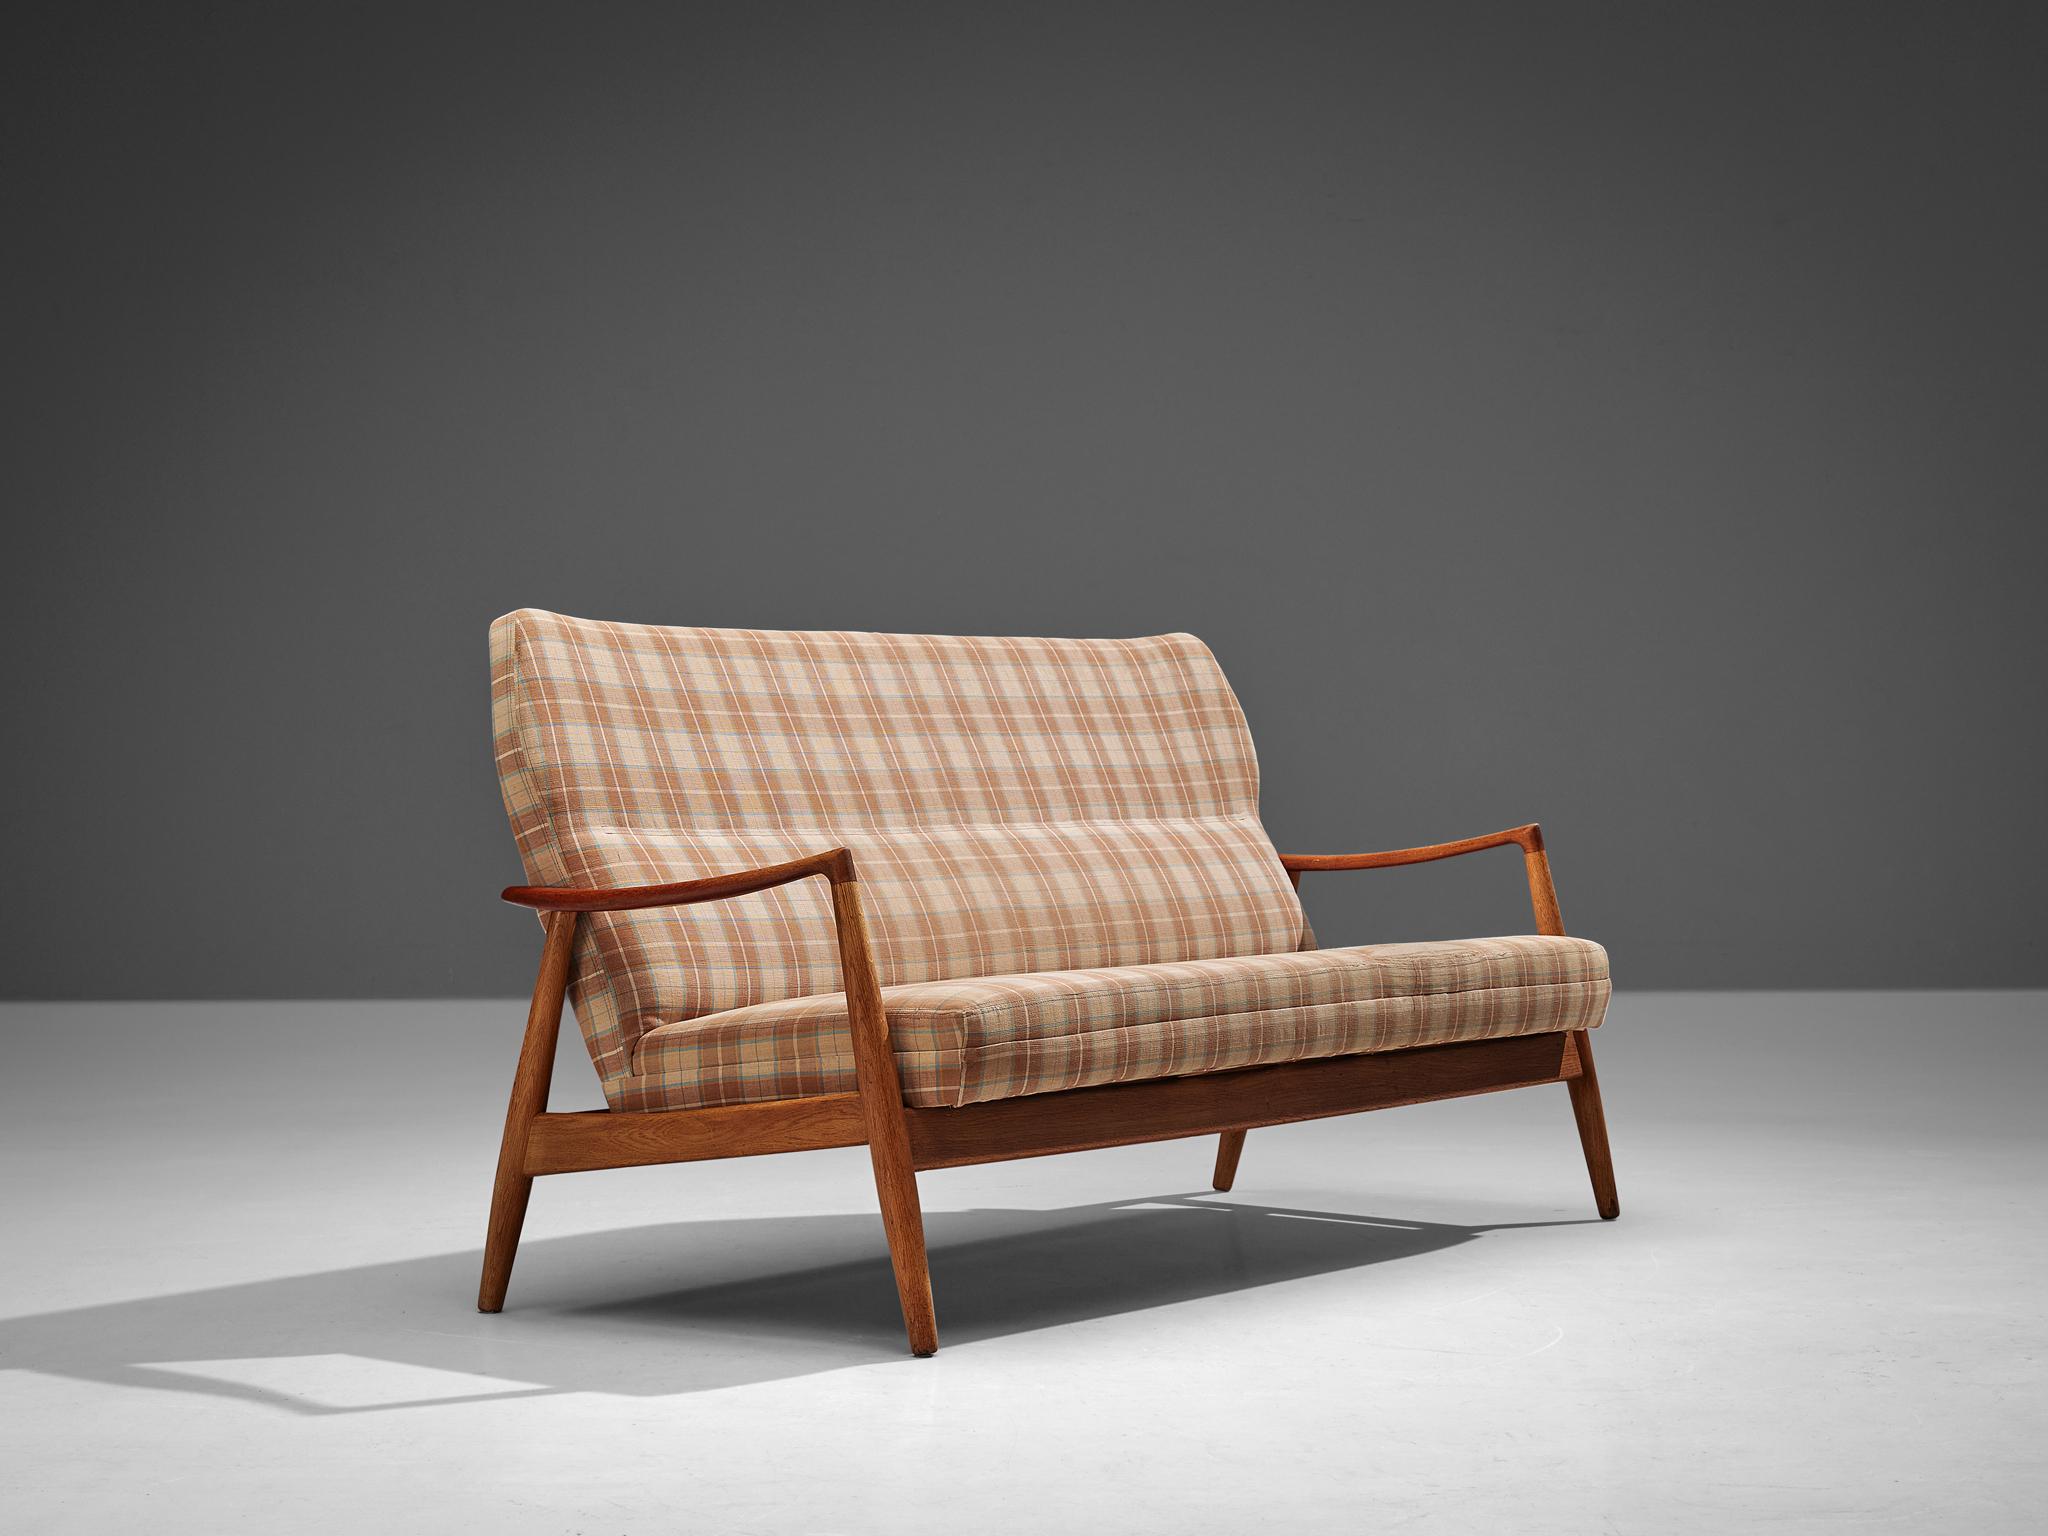 Aksel Bender Madsen, sofa, fabric, oak, teak, Denmark, 1960s 

The designer of this sofa is Aksel bender Madsen (1916-2000) who is known for his classic Mid-Century designs and worked with prominent Danish designers such as Kaare Klint (1888-1954),